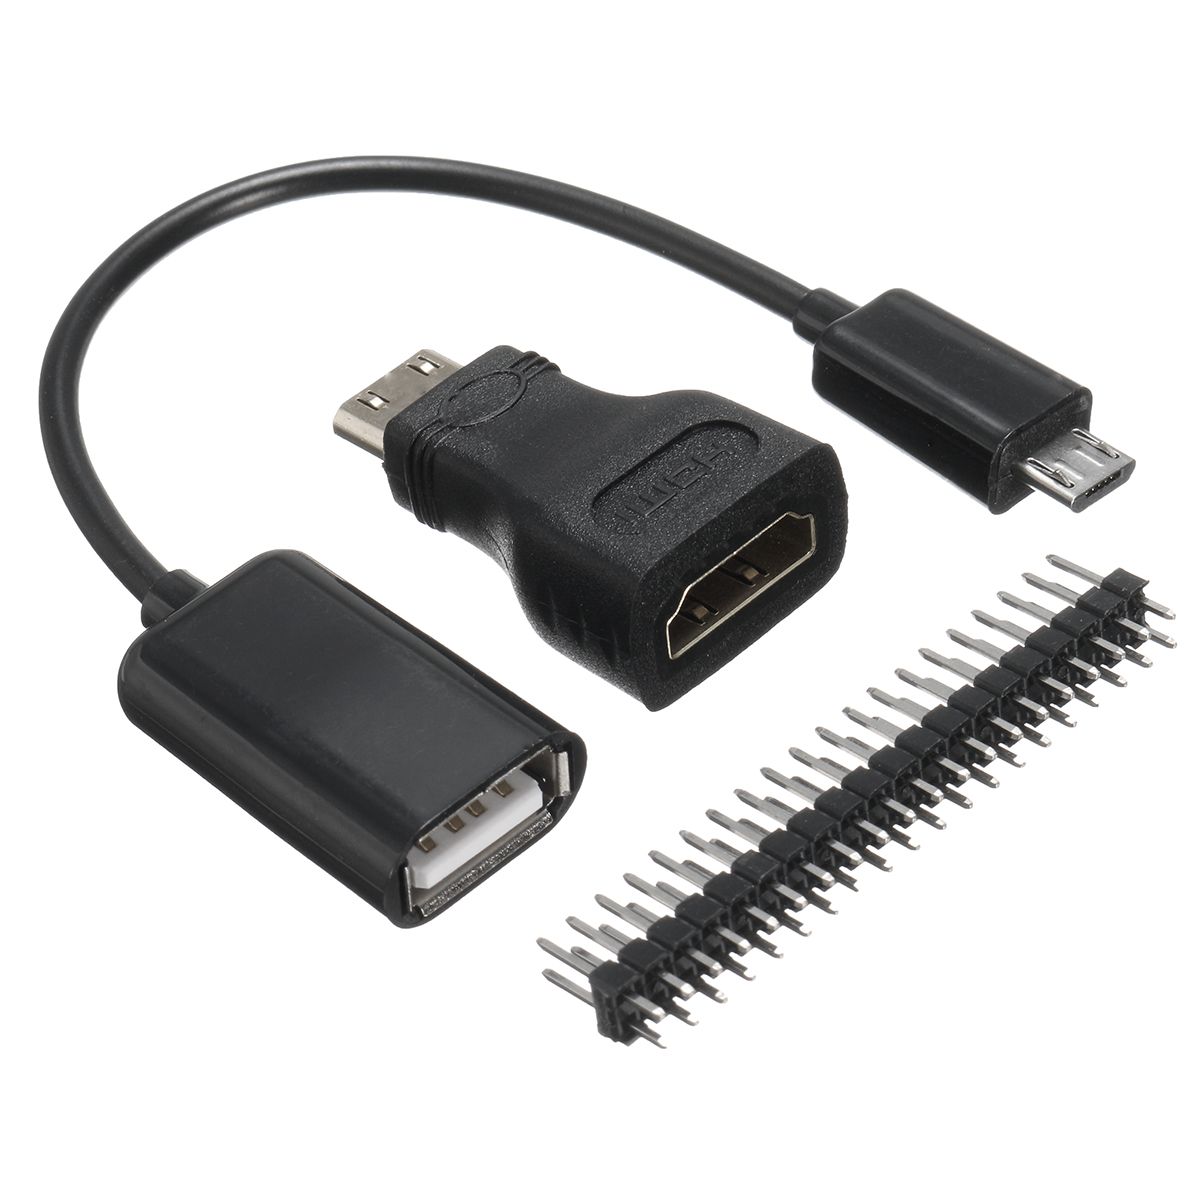 3-in-1-Mini-HD-to-HD-AdapterMicro-USB-to-USB-Female-Power-Cable40P-Pin-Kits-For-Raspberry-Pi-Zero-1195479